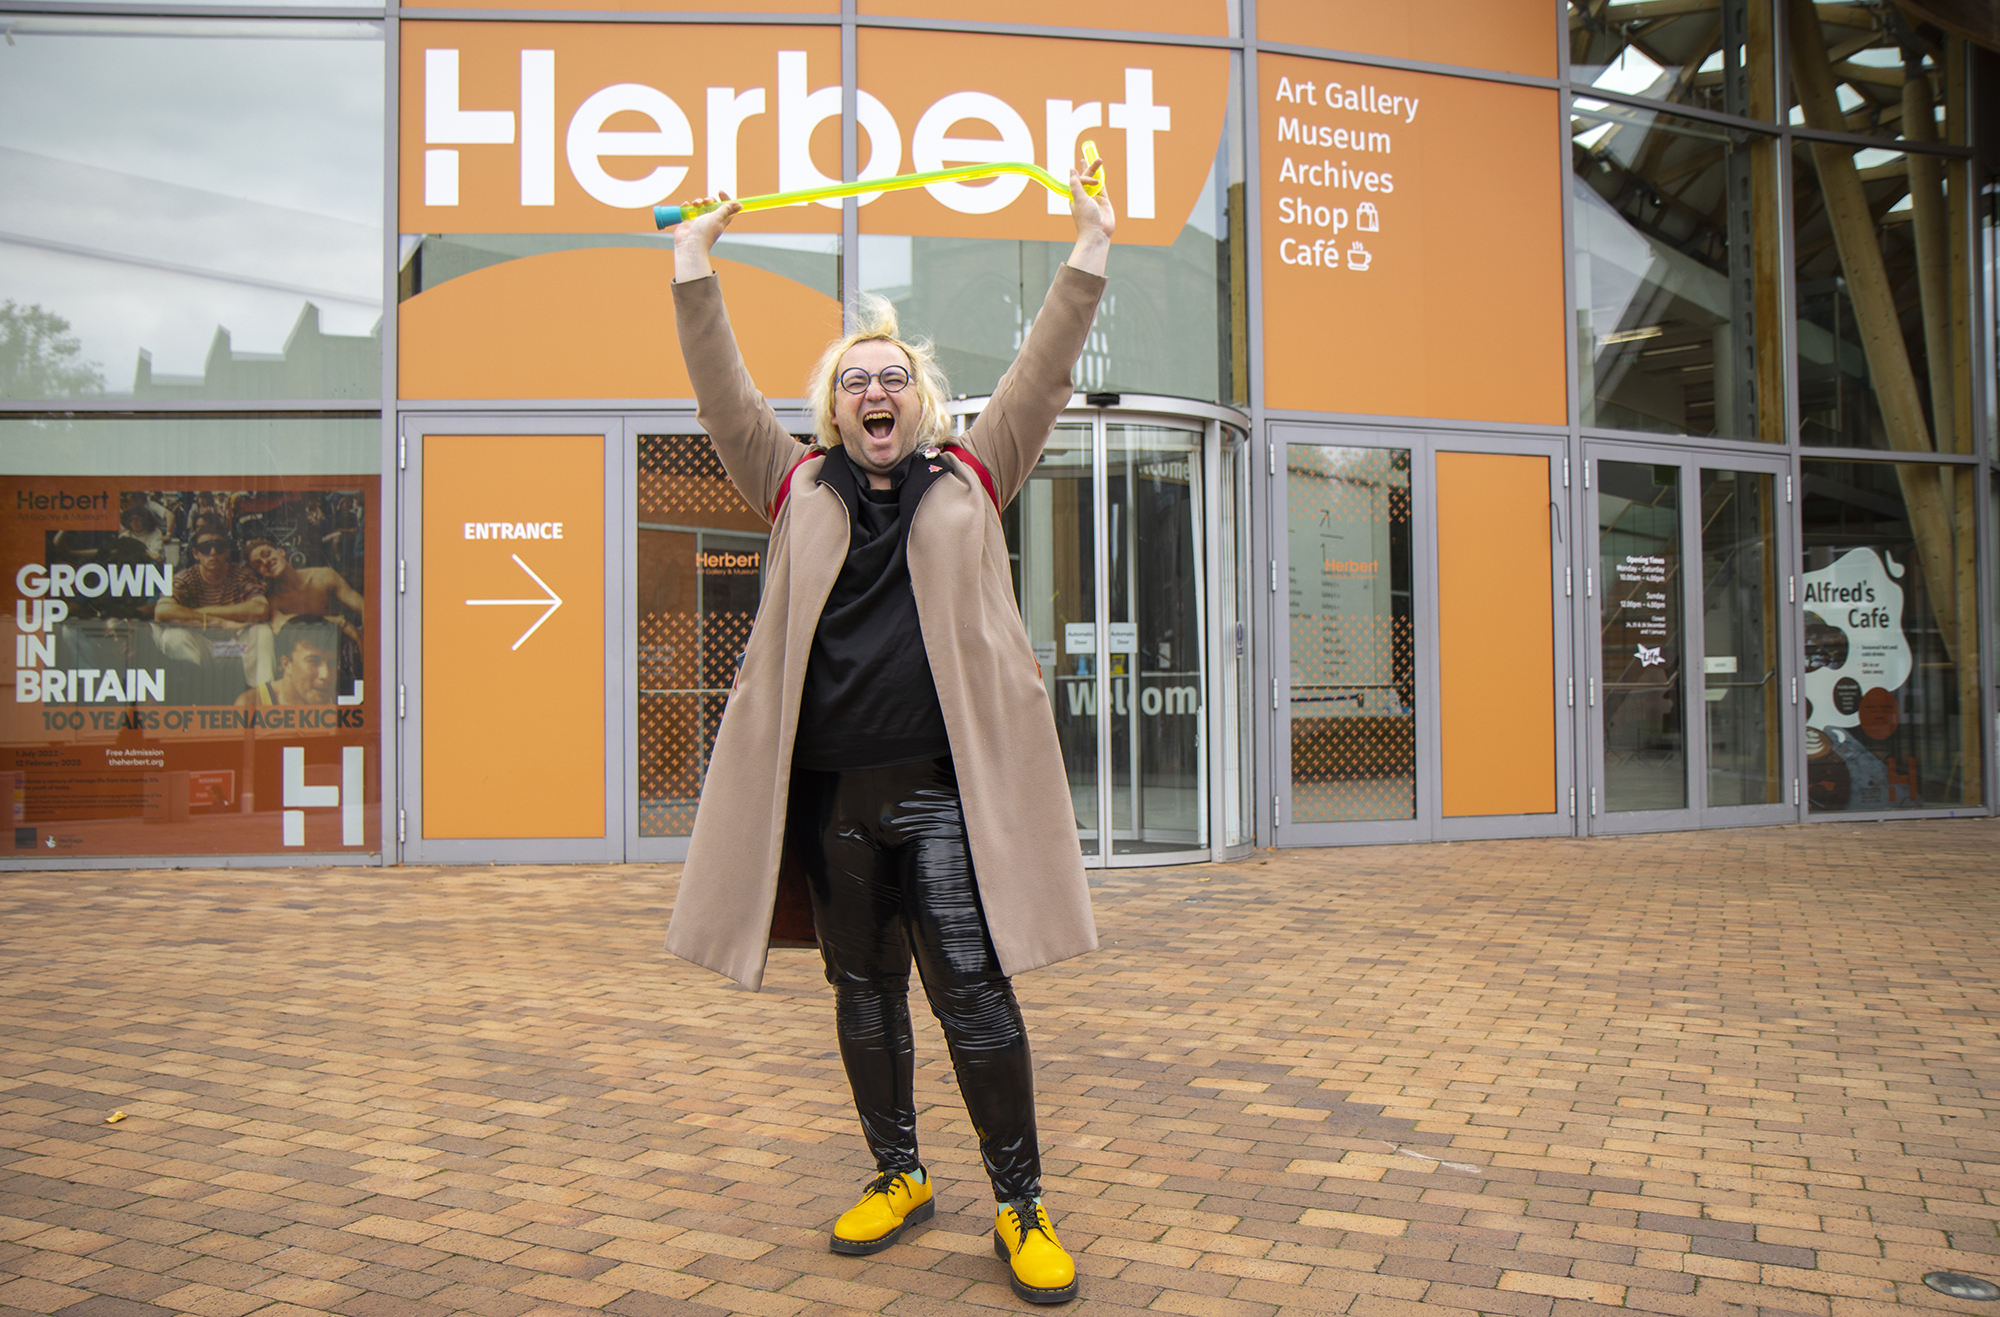 Alex Billingham stands outside the Herbert Art Gallery & Museum in a defiant pose: mouth open and arms raising a neon yellow perspex walking stick high in the air. She is wearing a black top, black PVC trousers, bright yellow shoes and a light tan coloured coat.